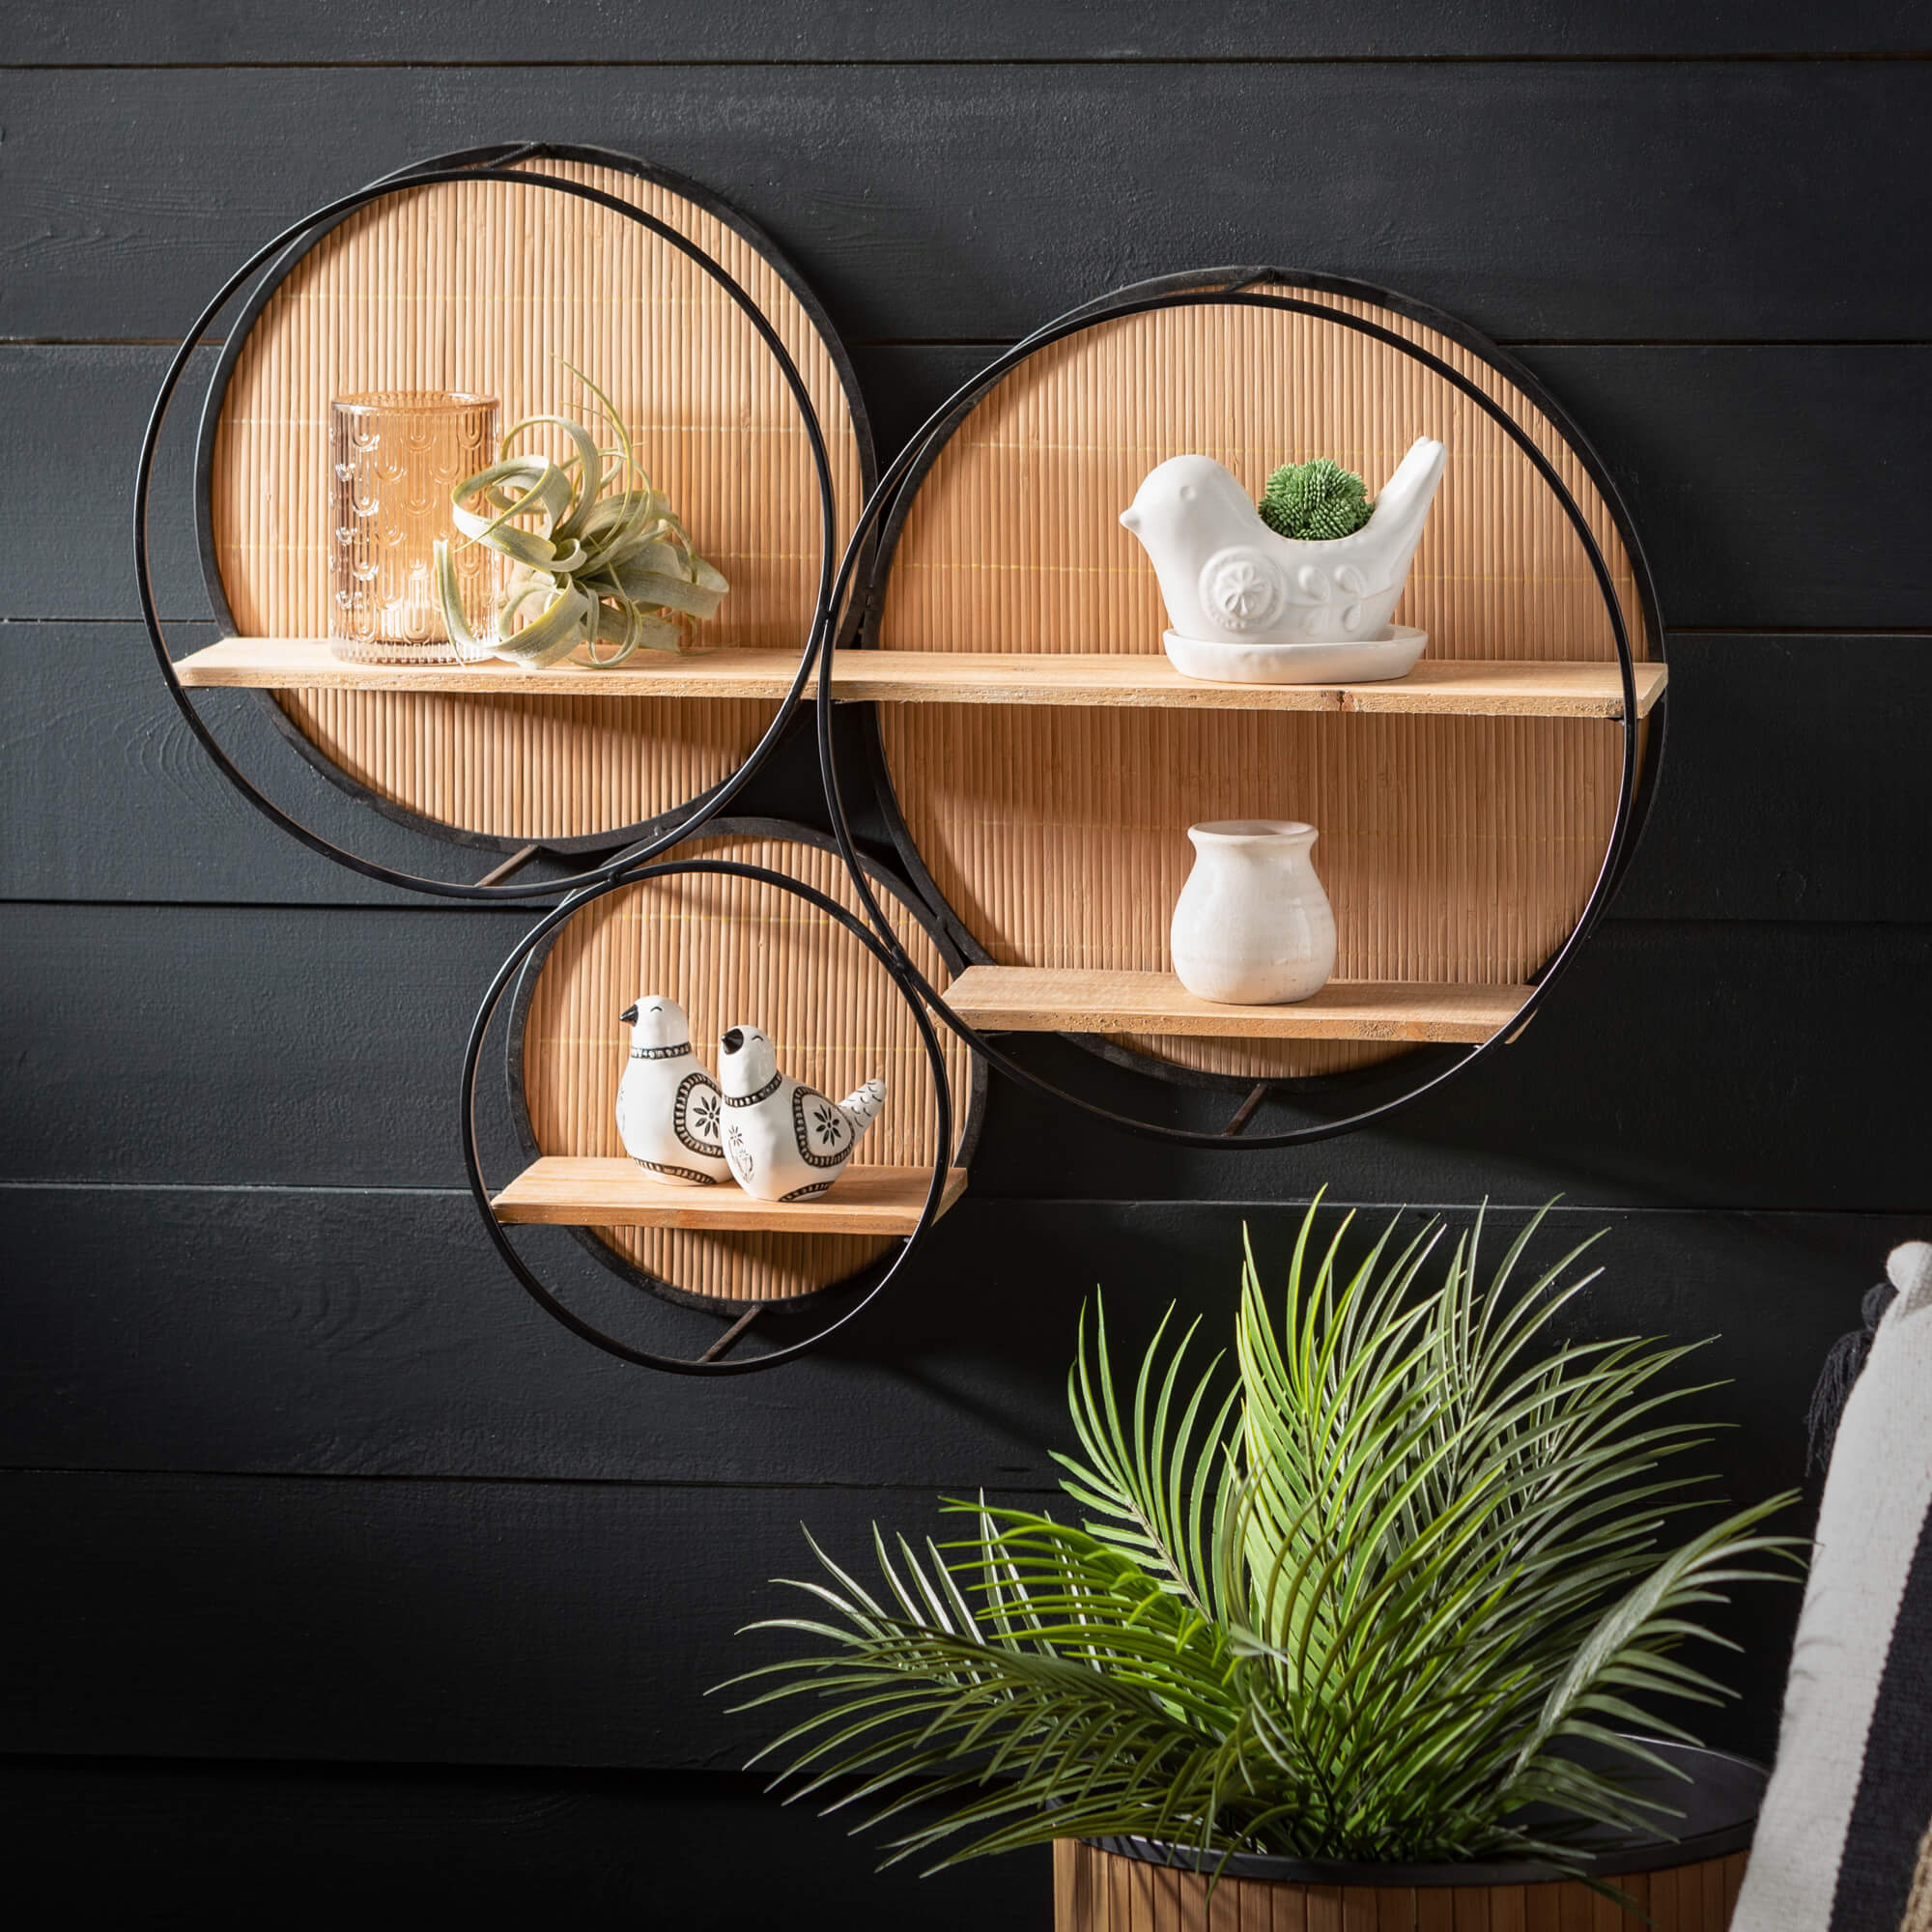 Circular Wood Tiered Shelving Unit Elevate Home Decor - Wall Decor